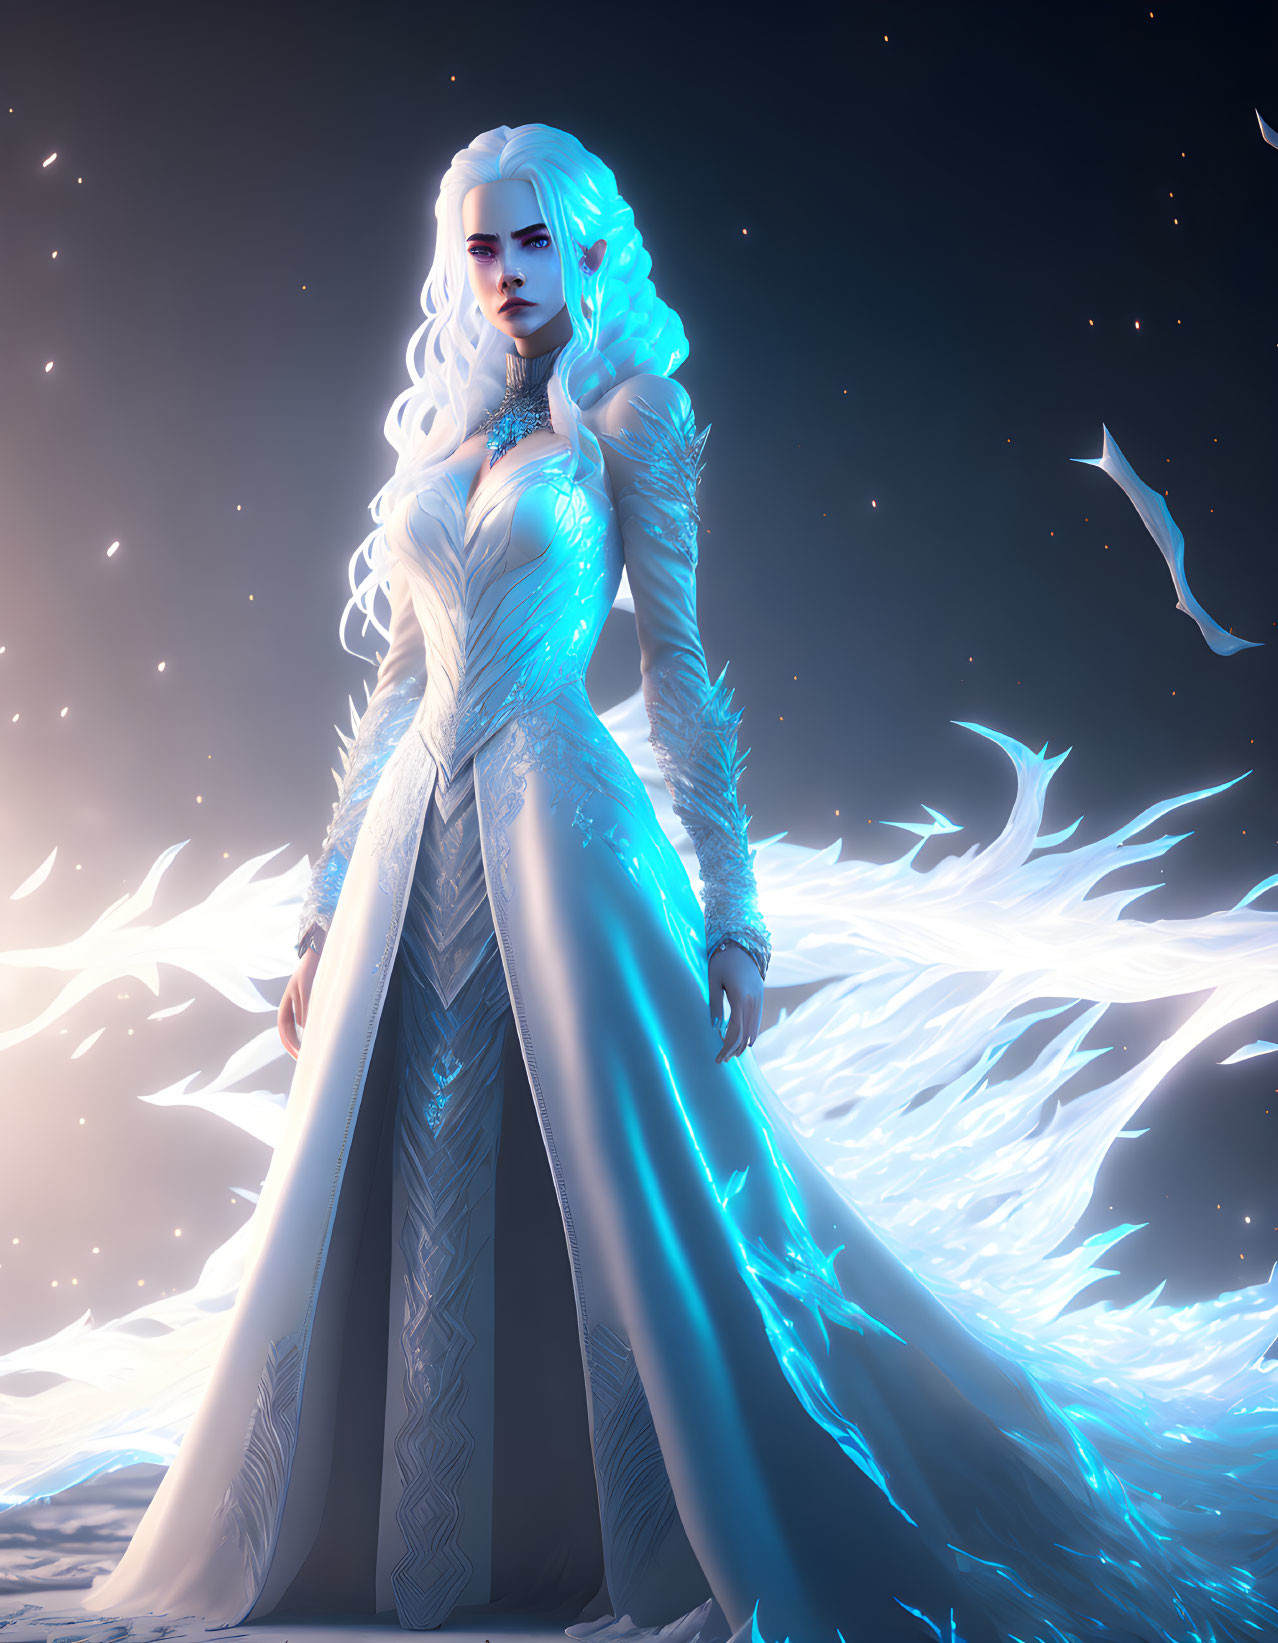 Mystical woman in white hair and ice-blue attire in snowy landscape